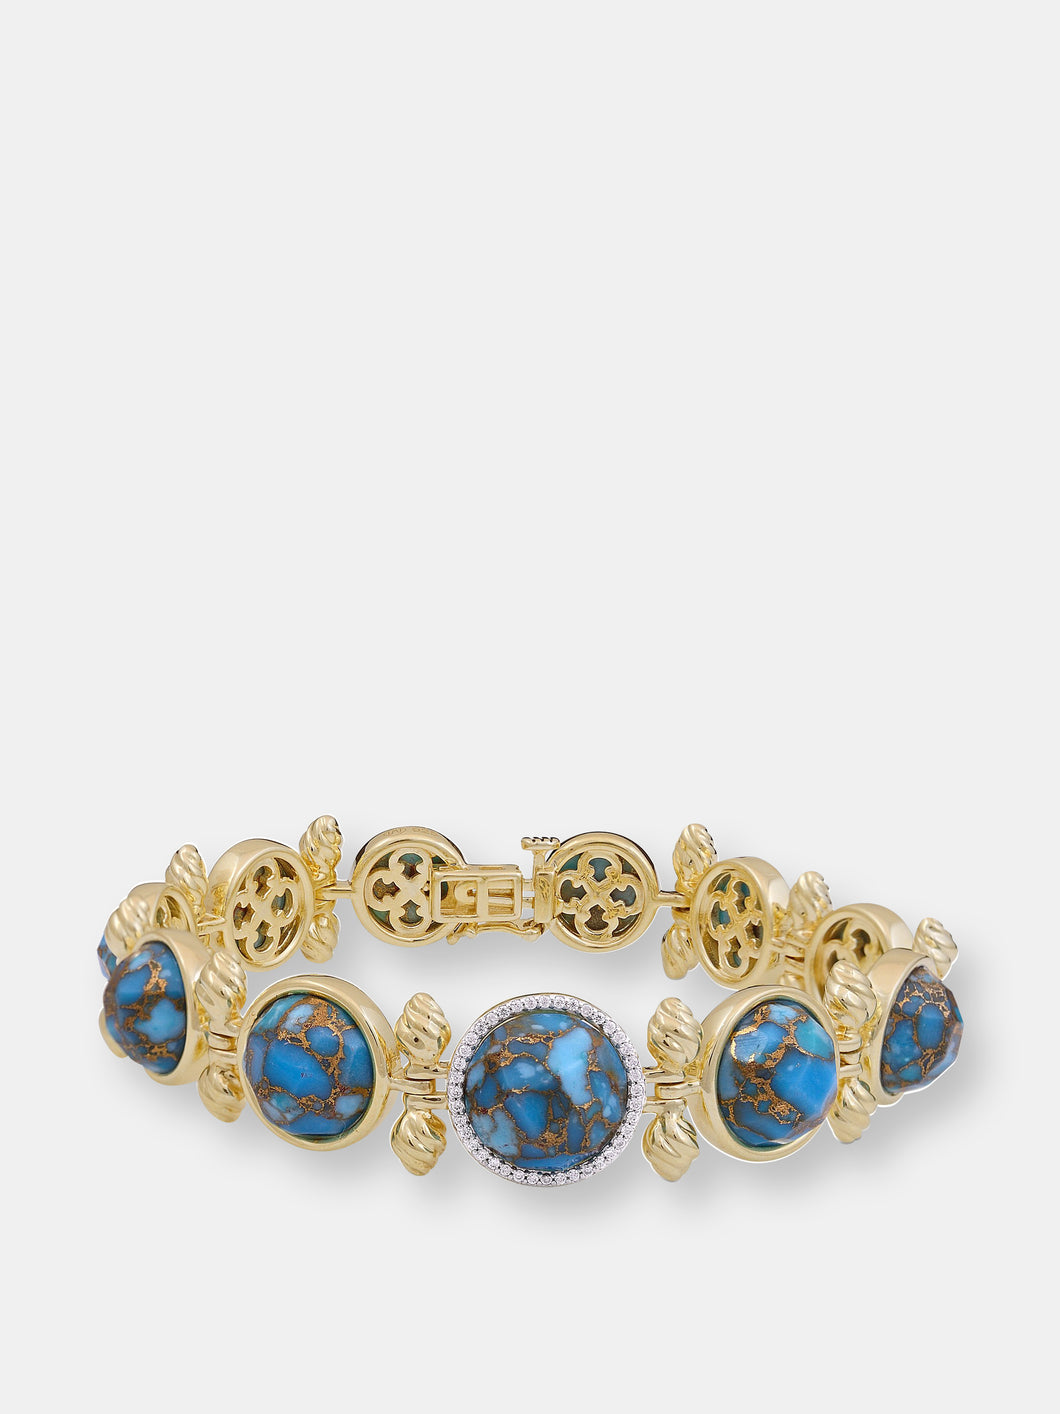 Summer Nights Turquoise & Diamond Bracelet In 14K Yellow Gold Plated Sterling Silver